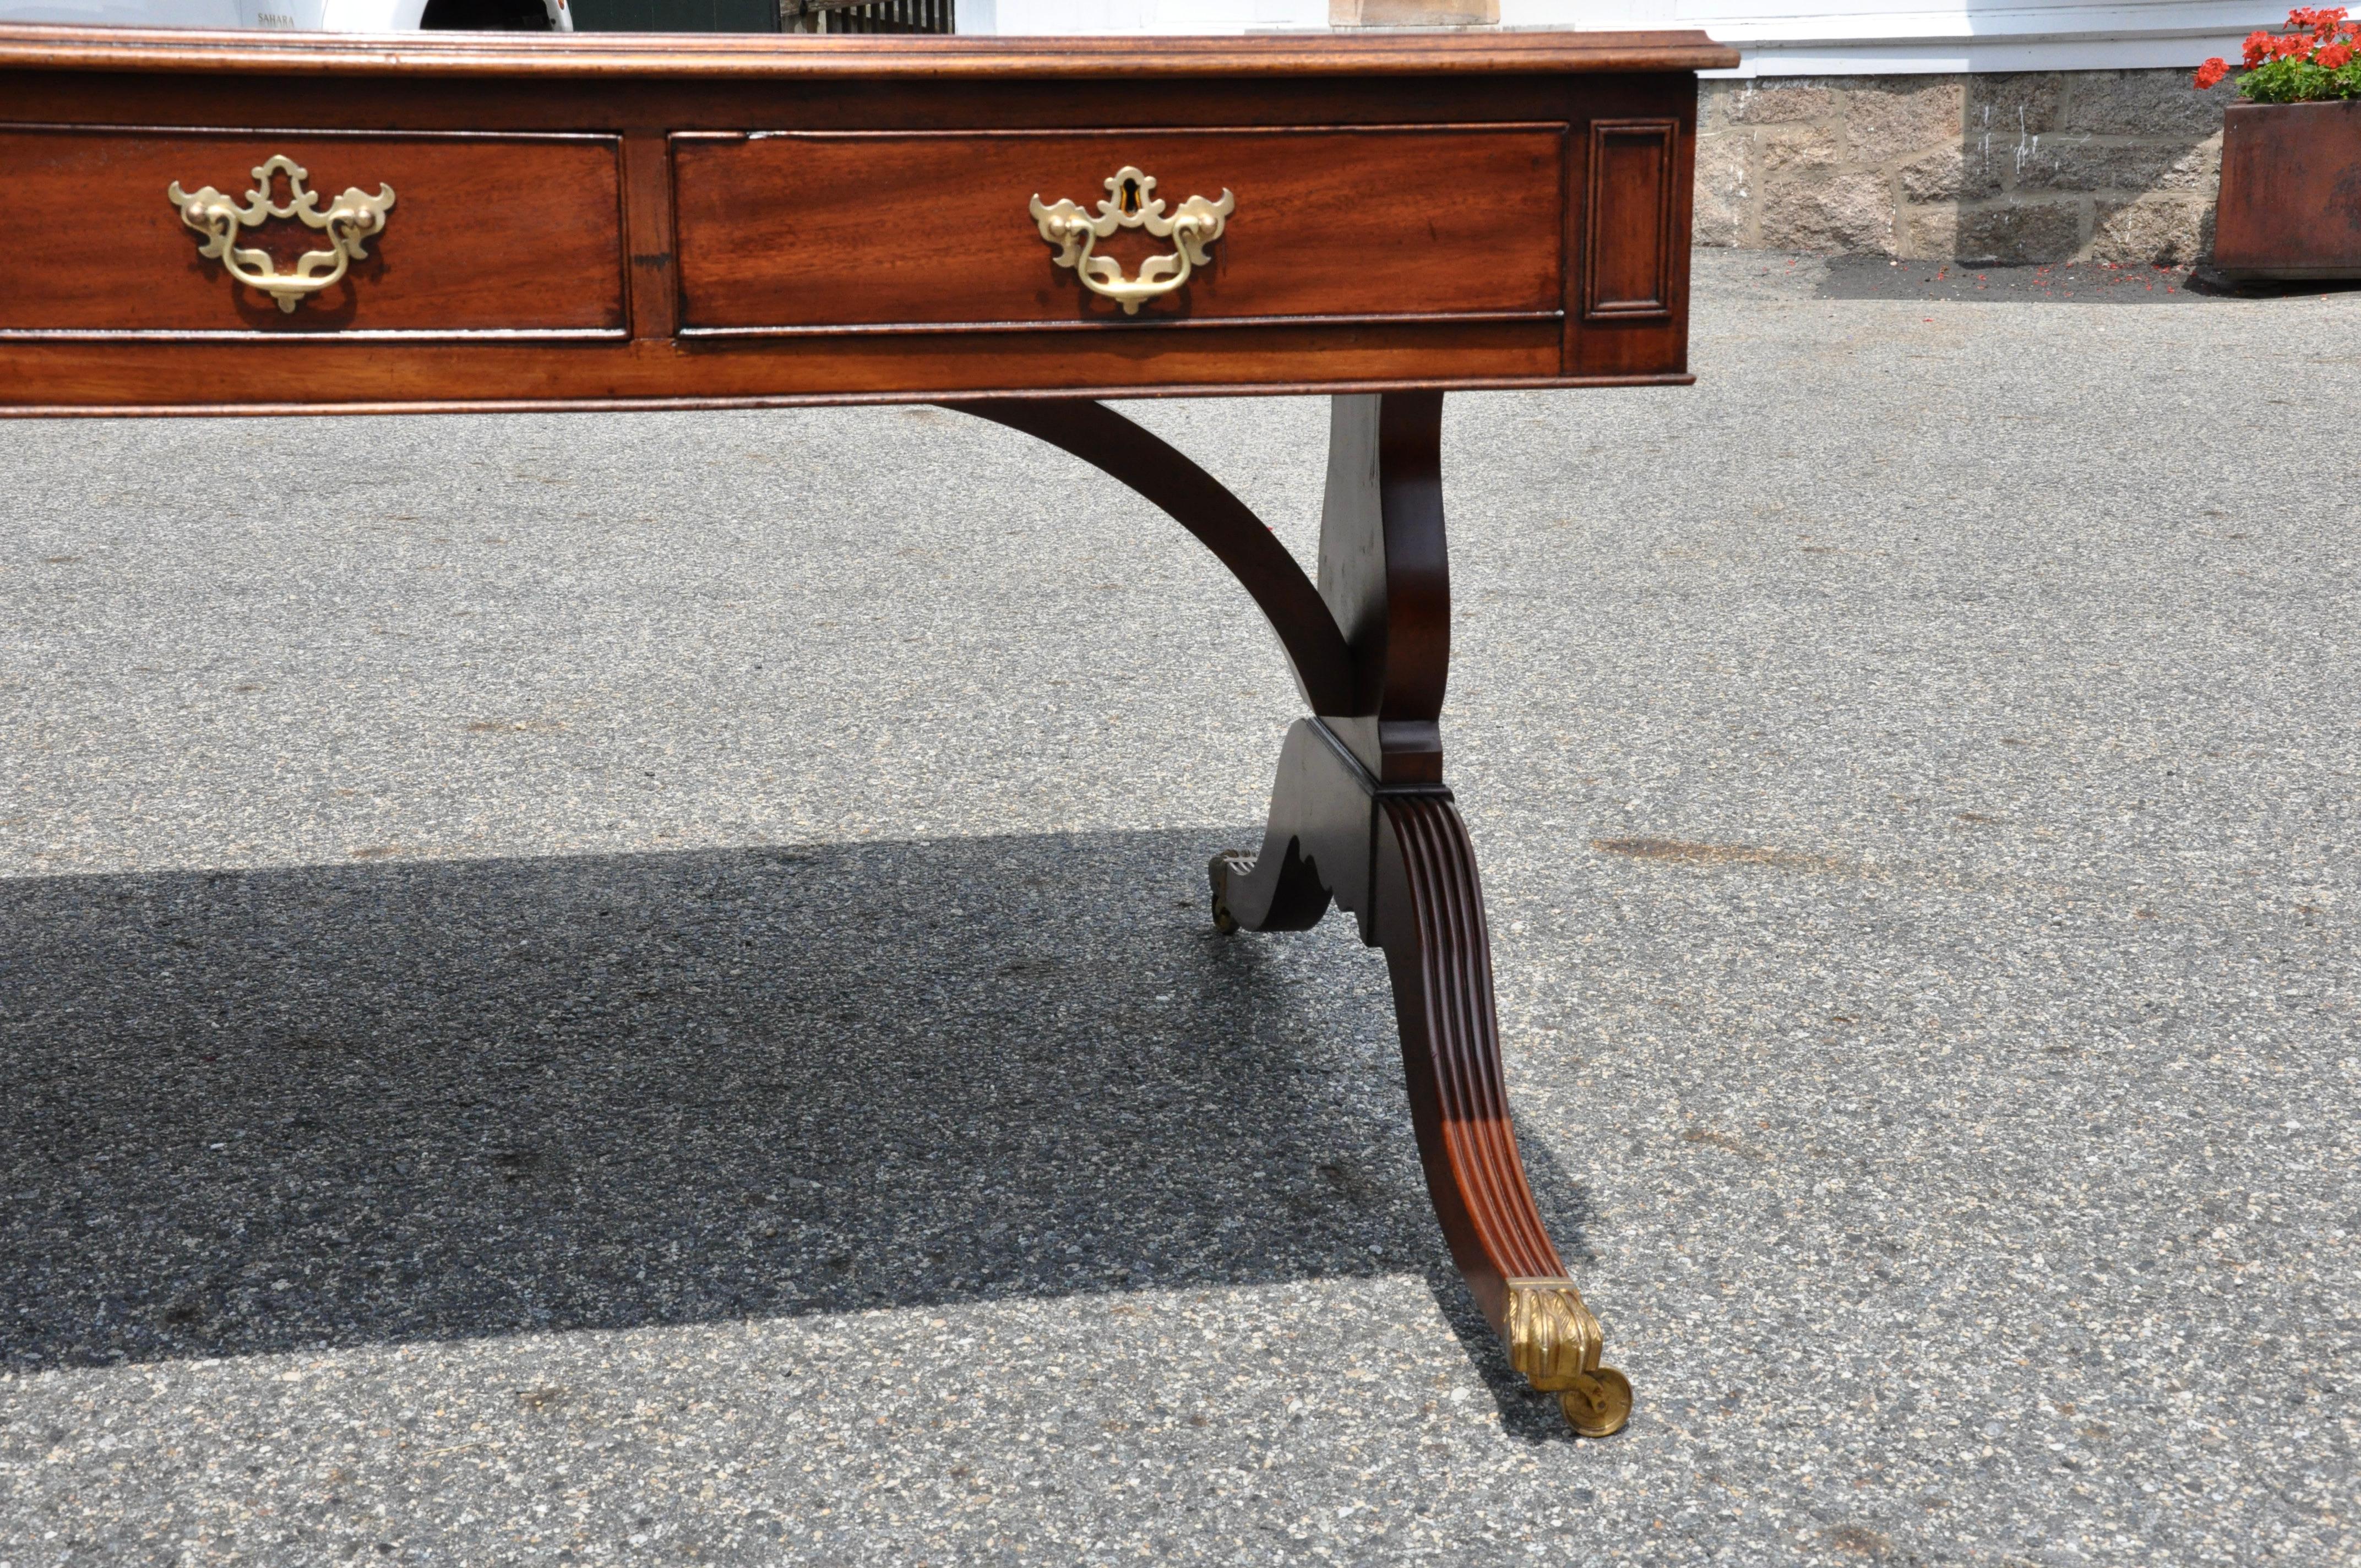 Late 19th century English Regency style leather top partners desk. Three drawers on both sides. Regency outswept legs and side supports. Original casters. Mahogany primary construction with oak secondary. Original leather top exhibiting beautifully